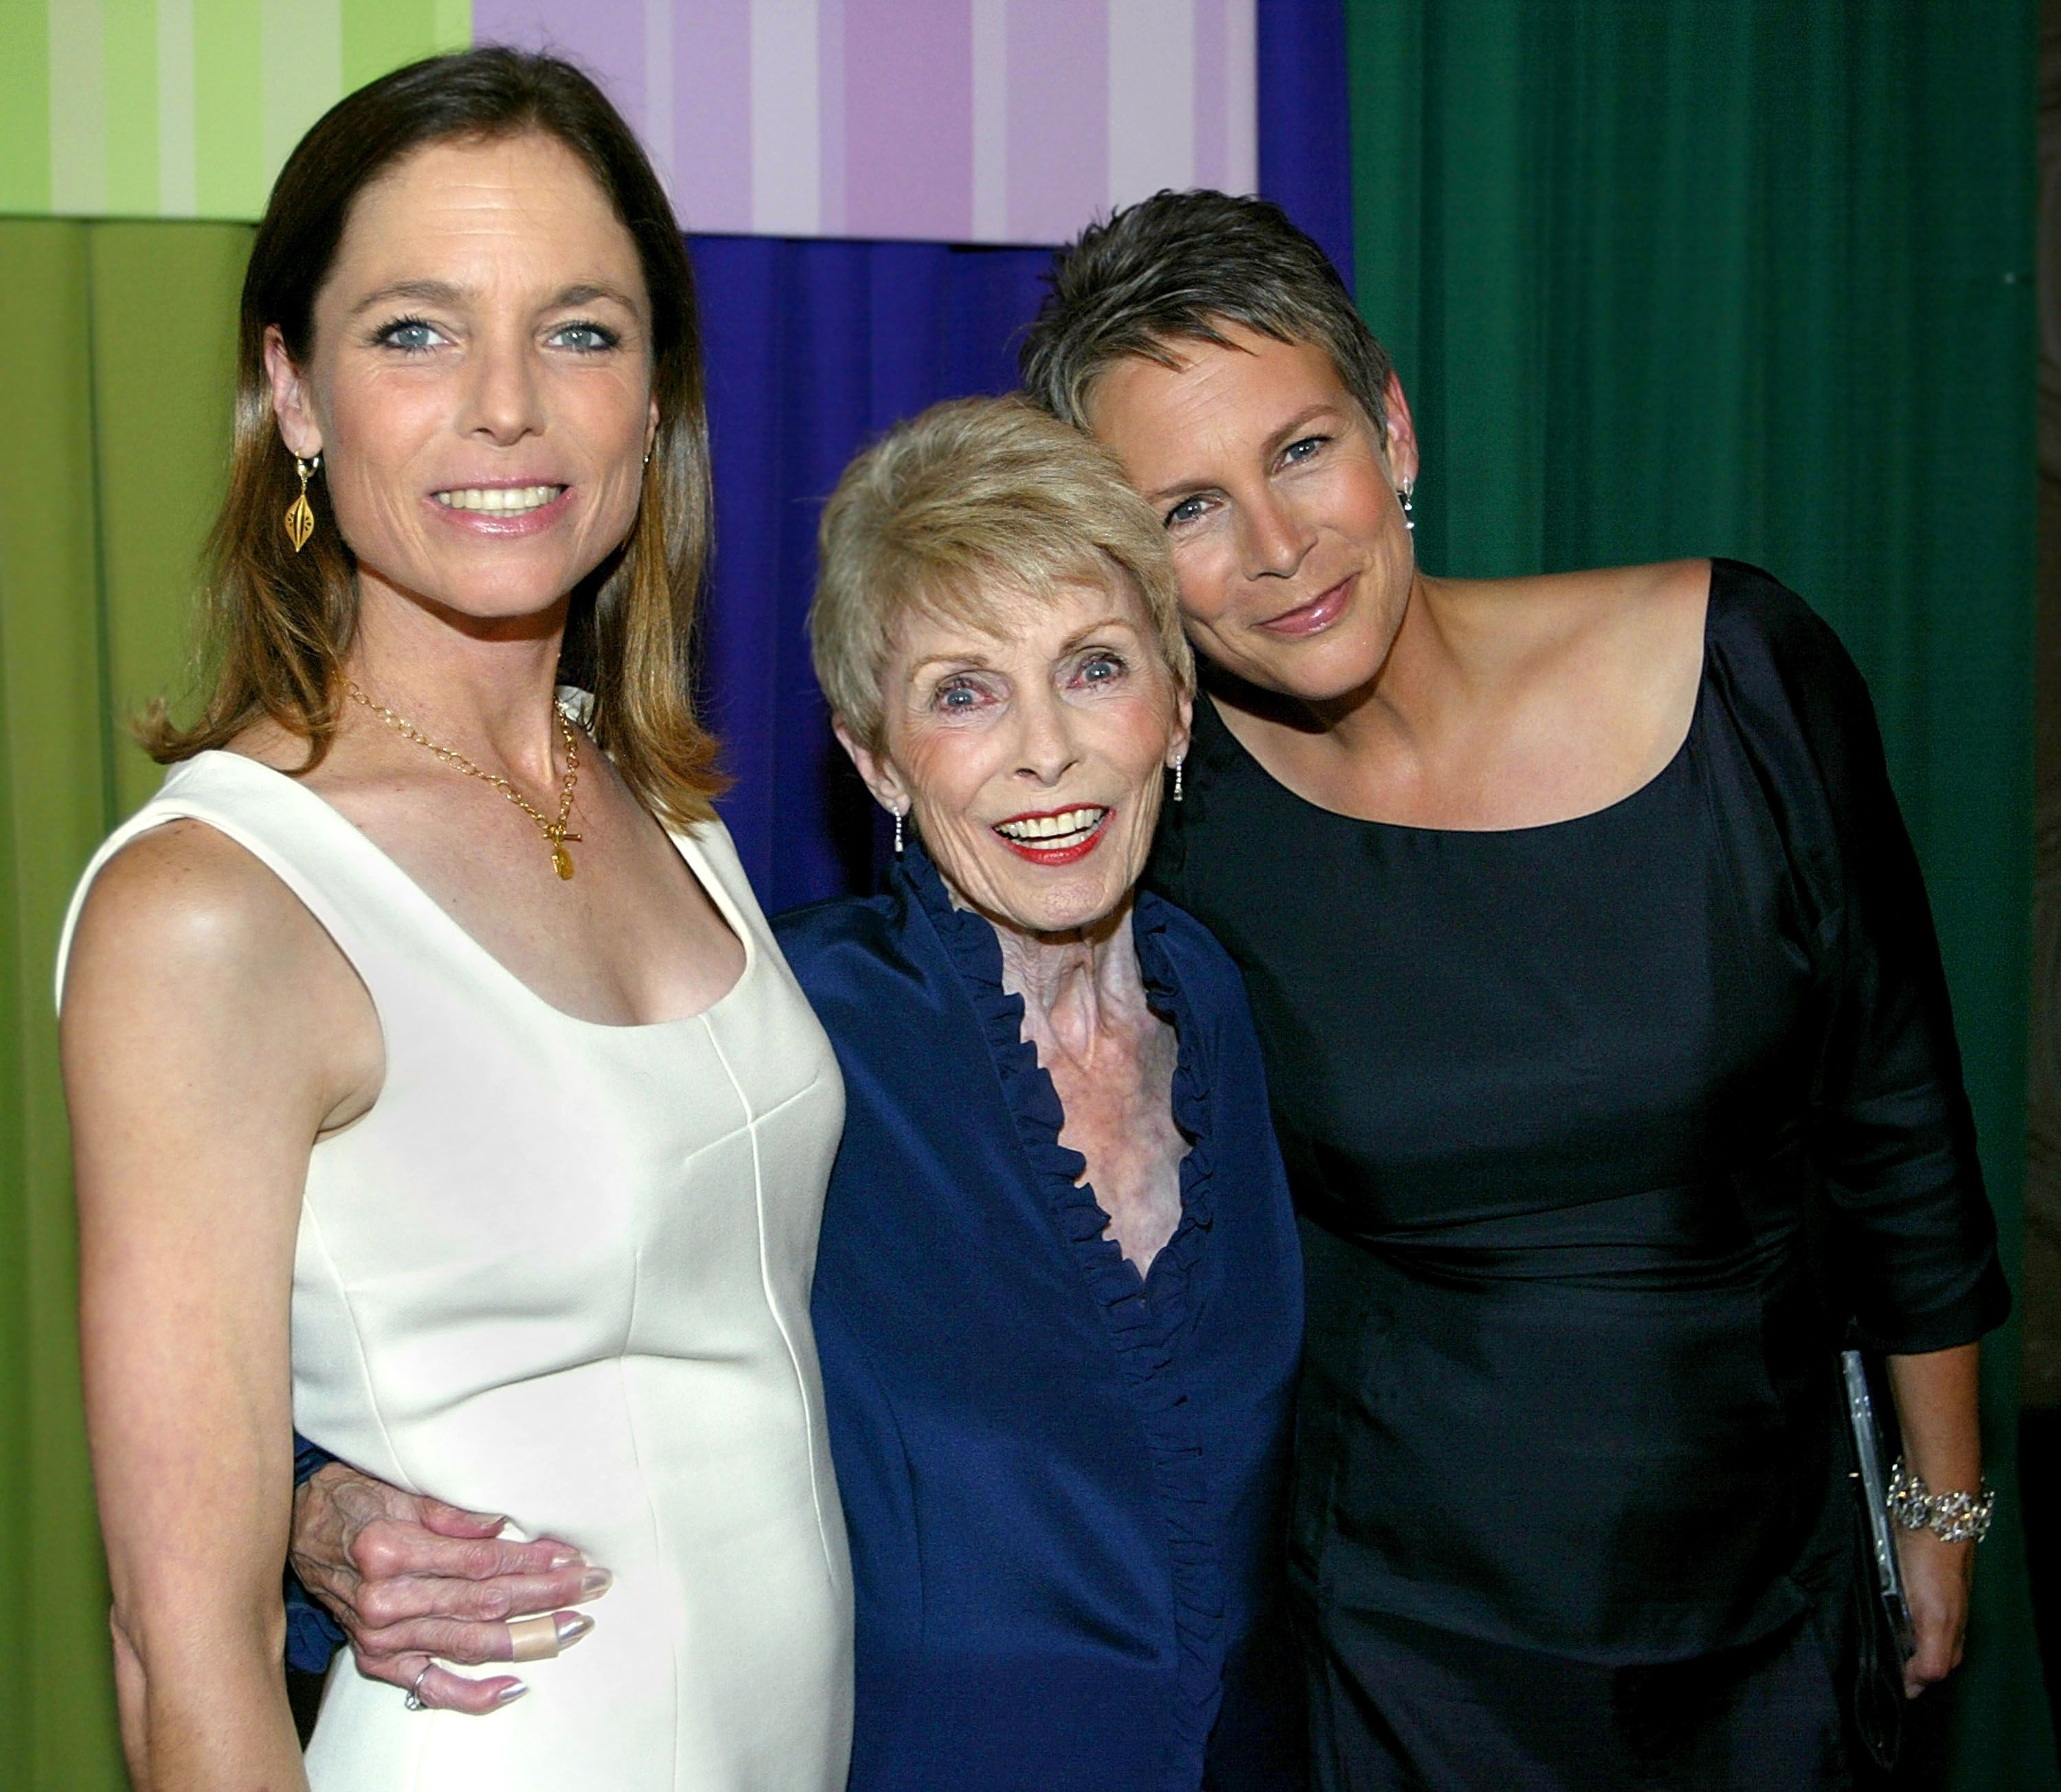  Jamie Lee Curtis with mother Janet Leigh and sister Kelly at the premiere of the film "Freaky Friday" in 2003 | Source: Getty Images